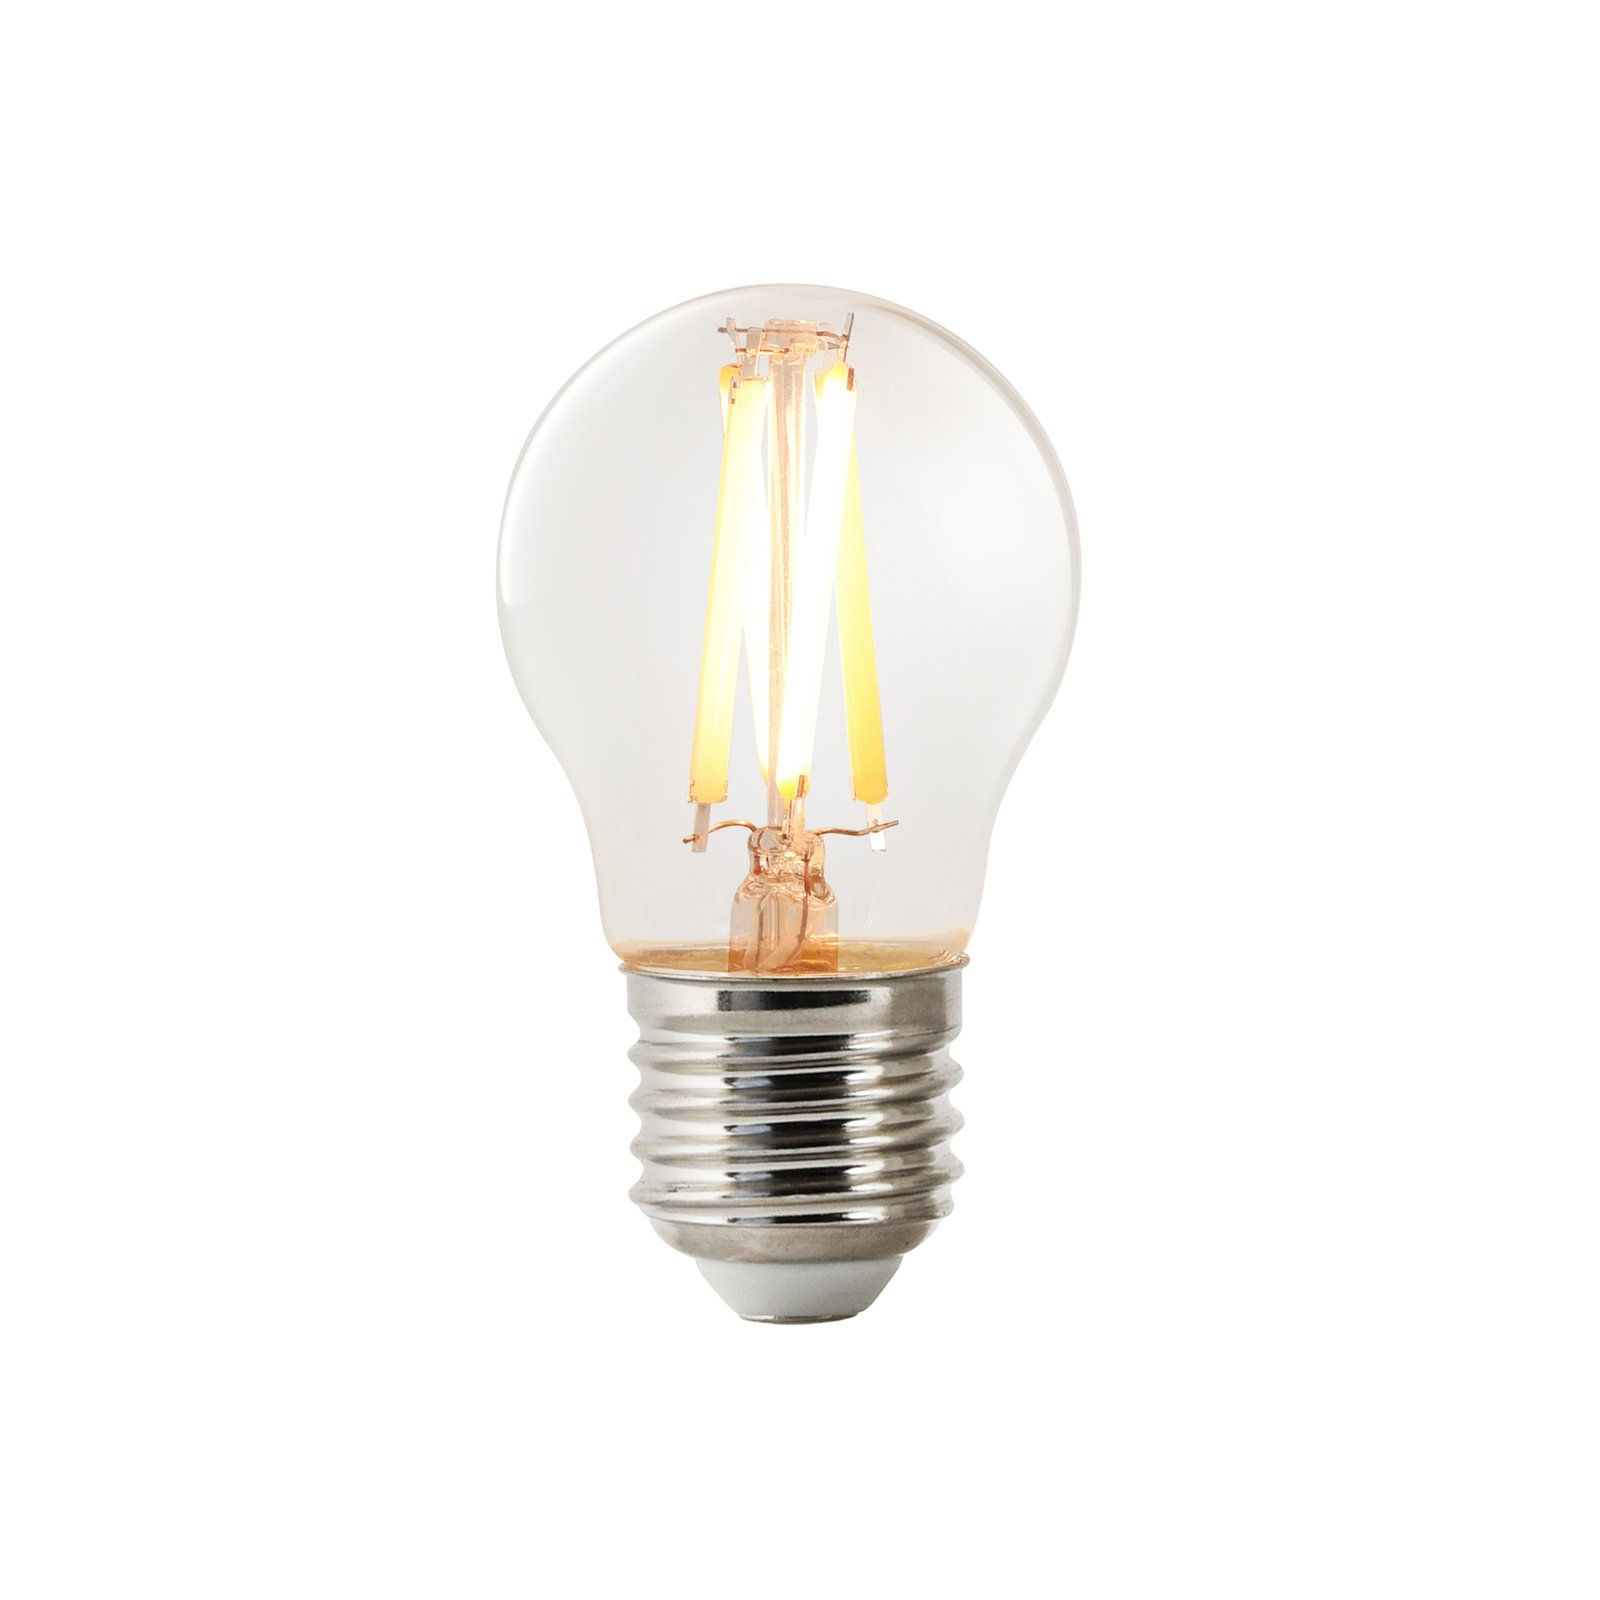 Filament LED bulb E27 G45 4.7W 600lm CCT, dimmable